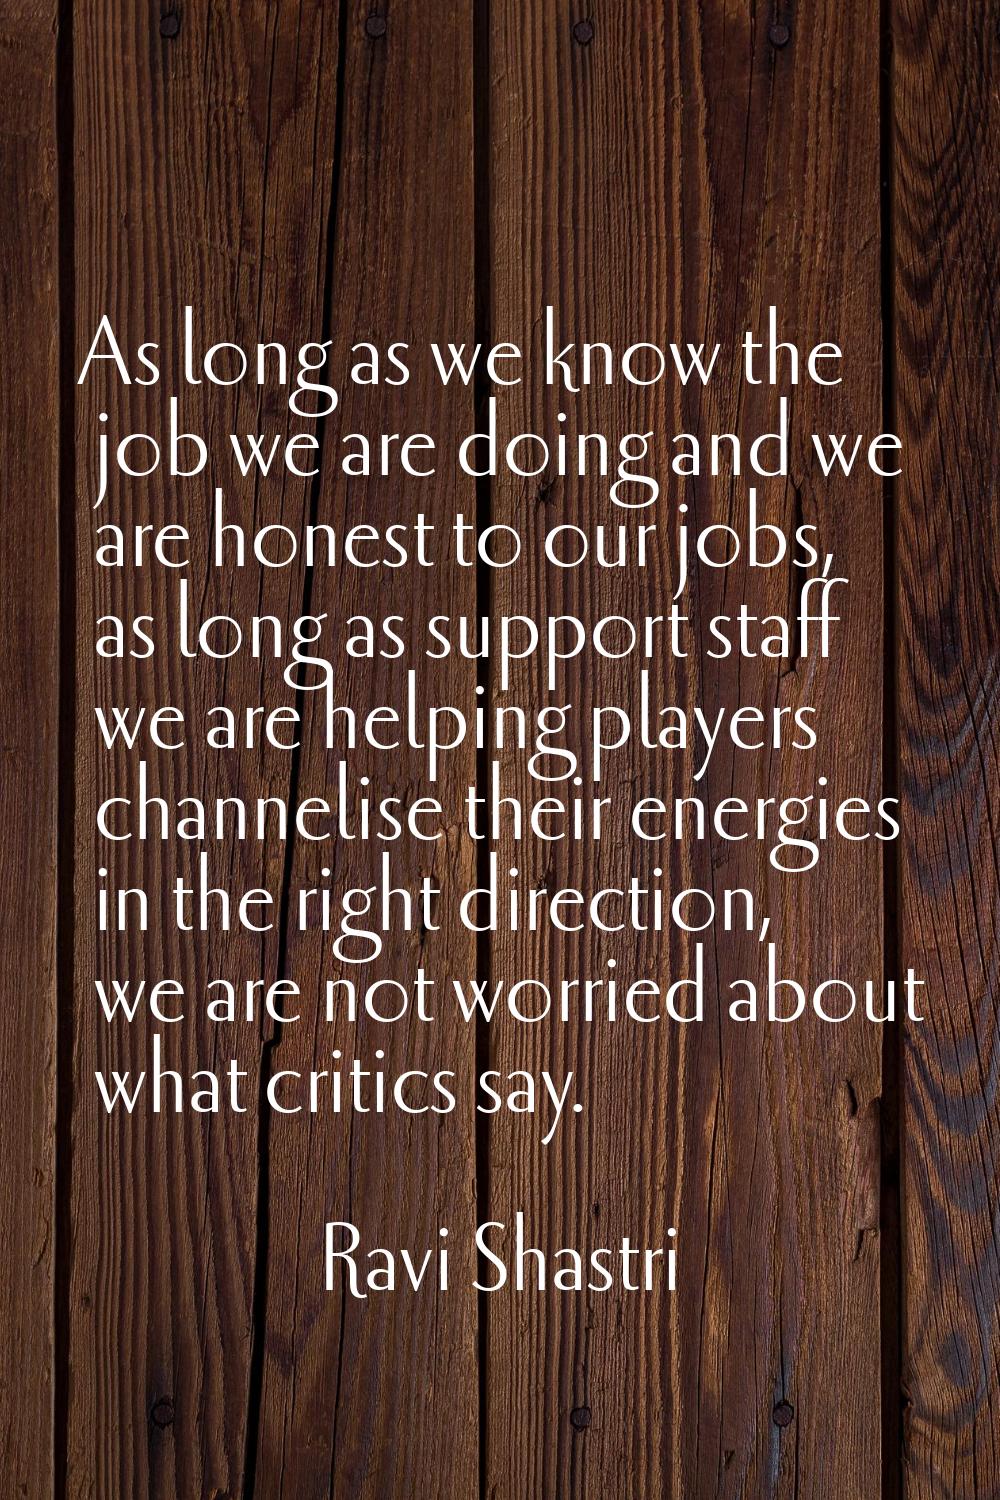 As long as we know the job we are doing and we are honest to our jobs, as long as support staff we 